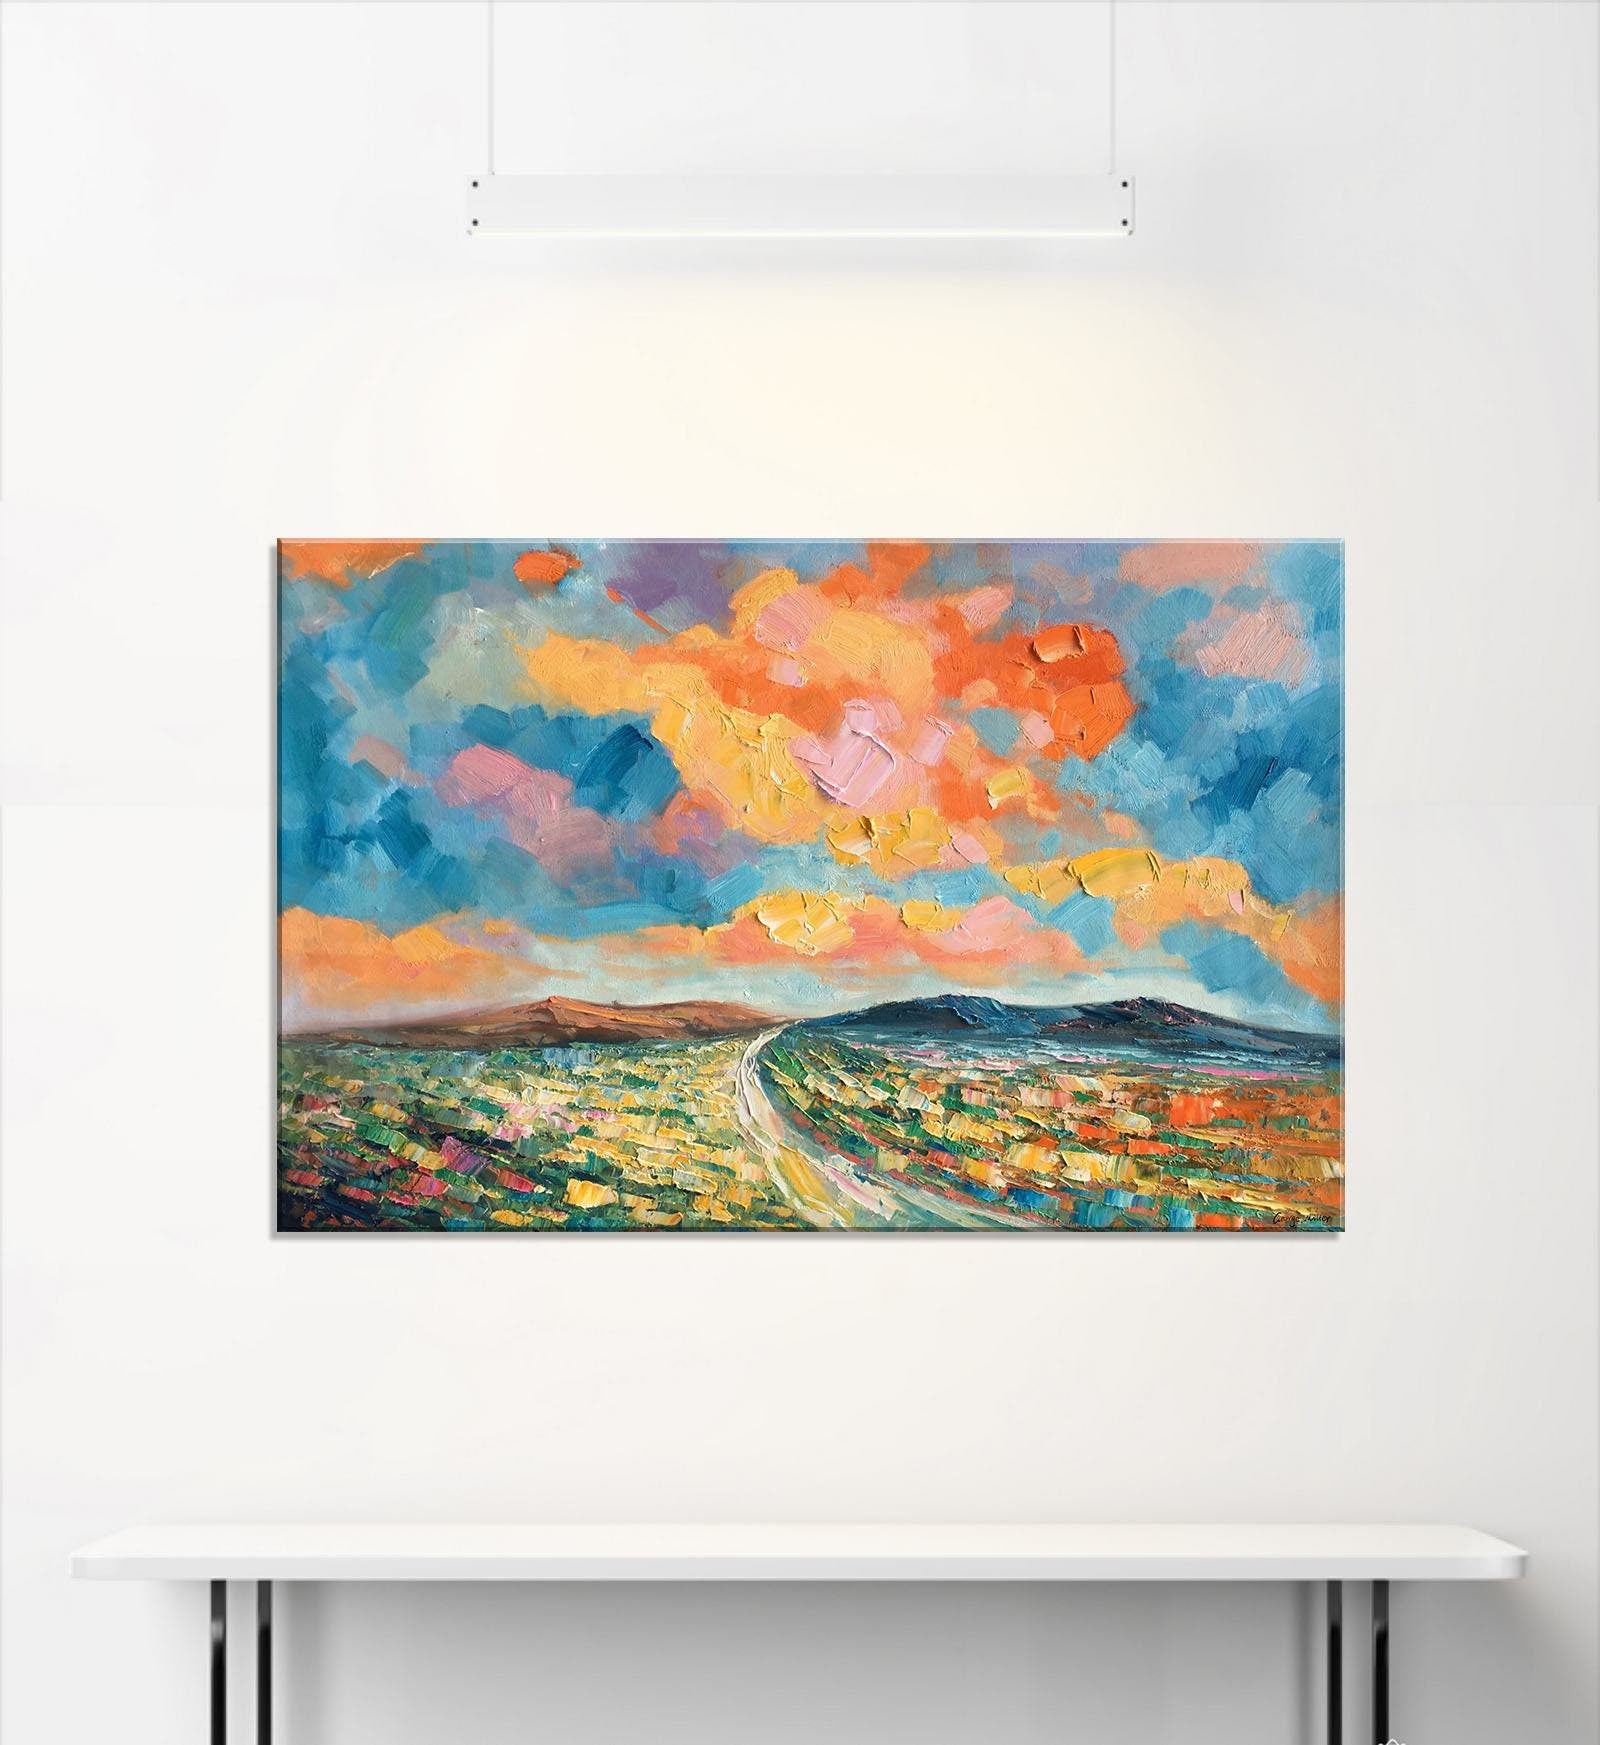 Create a Bold Statement with Extra Large Abstract Painting- Palette Knife Oil Painting, 32x48 inches Contemporary Artwork